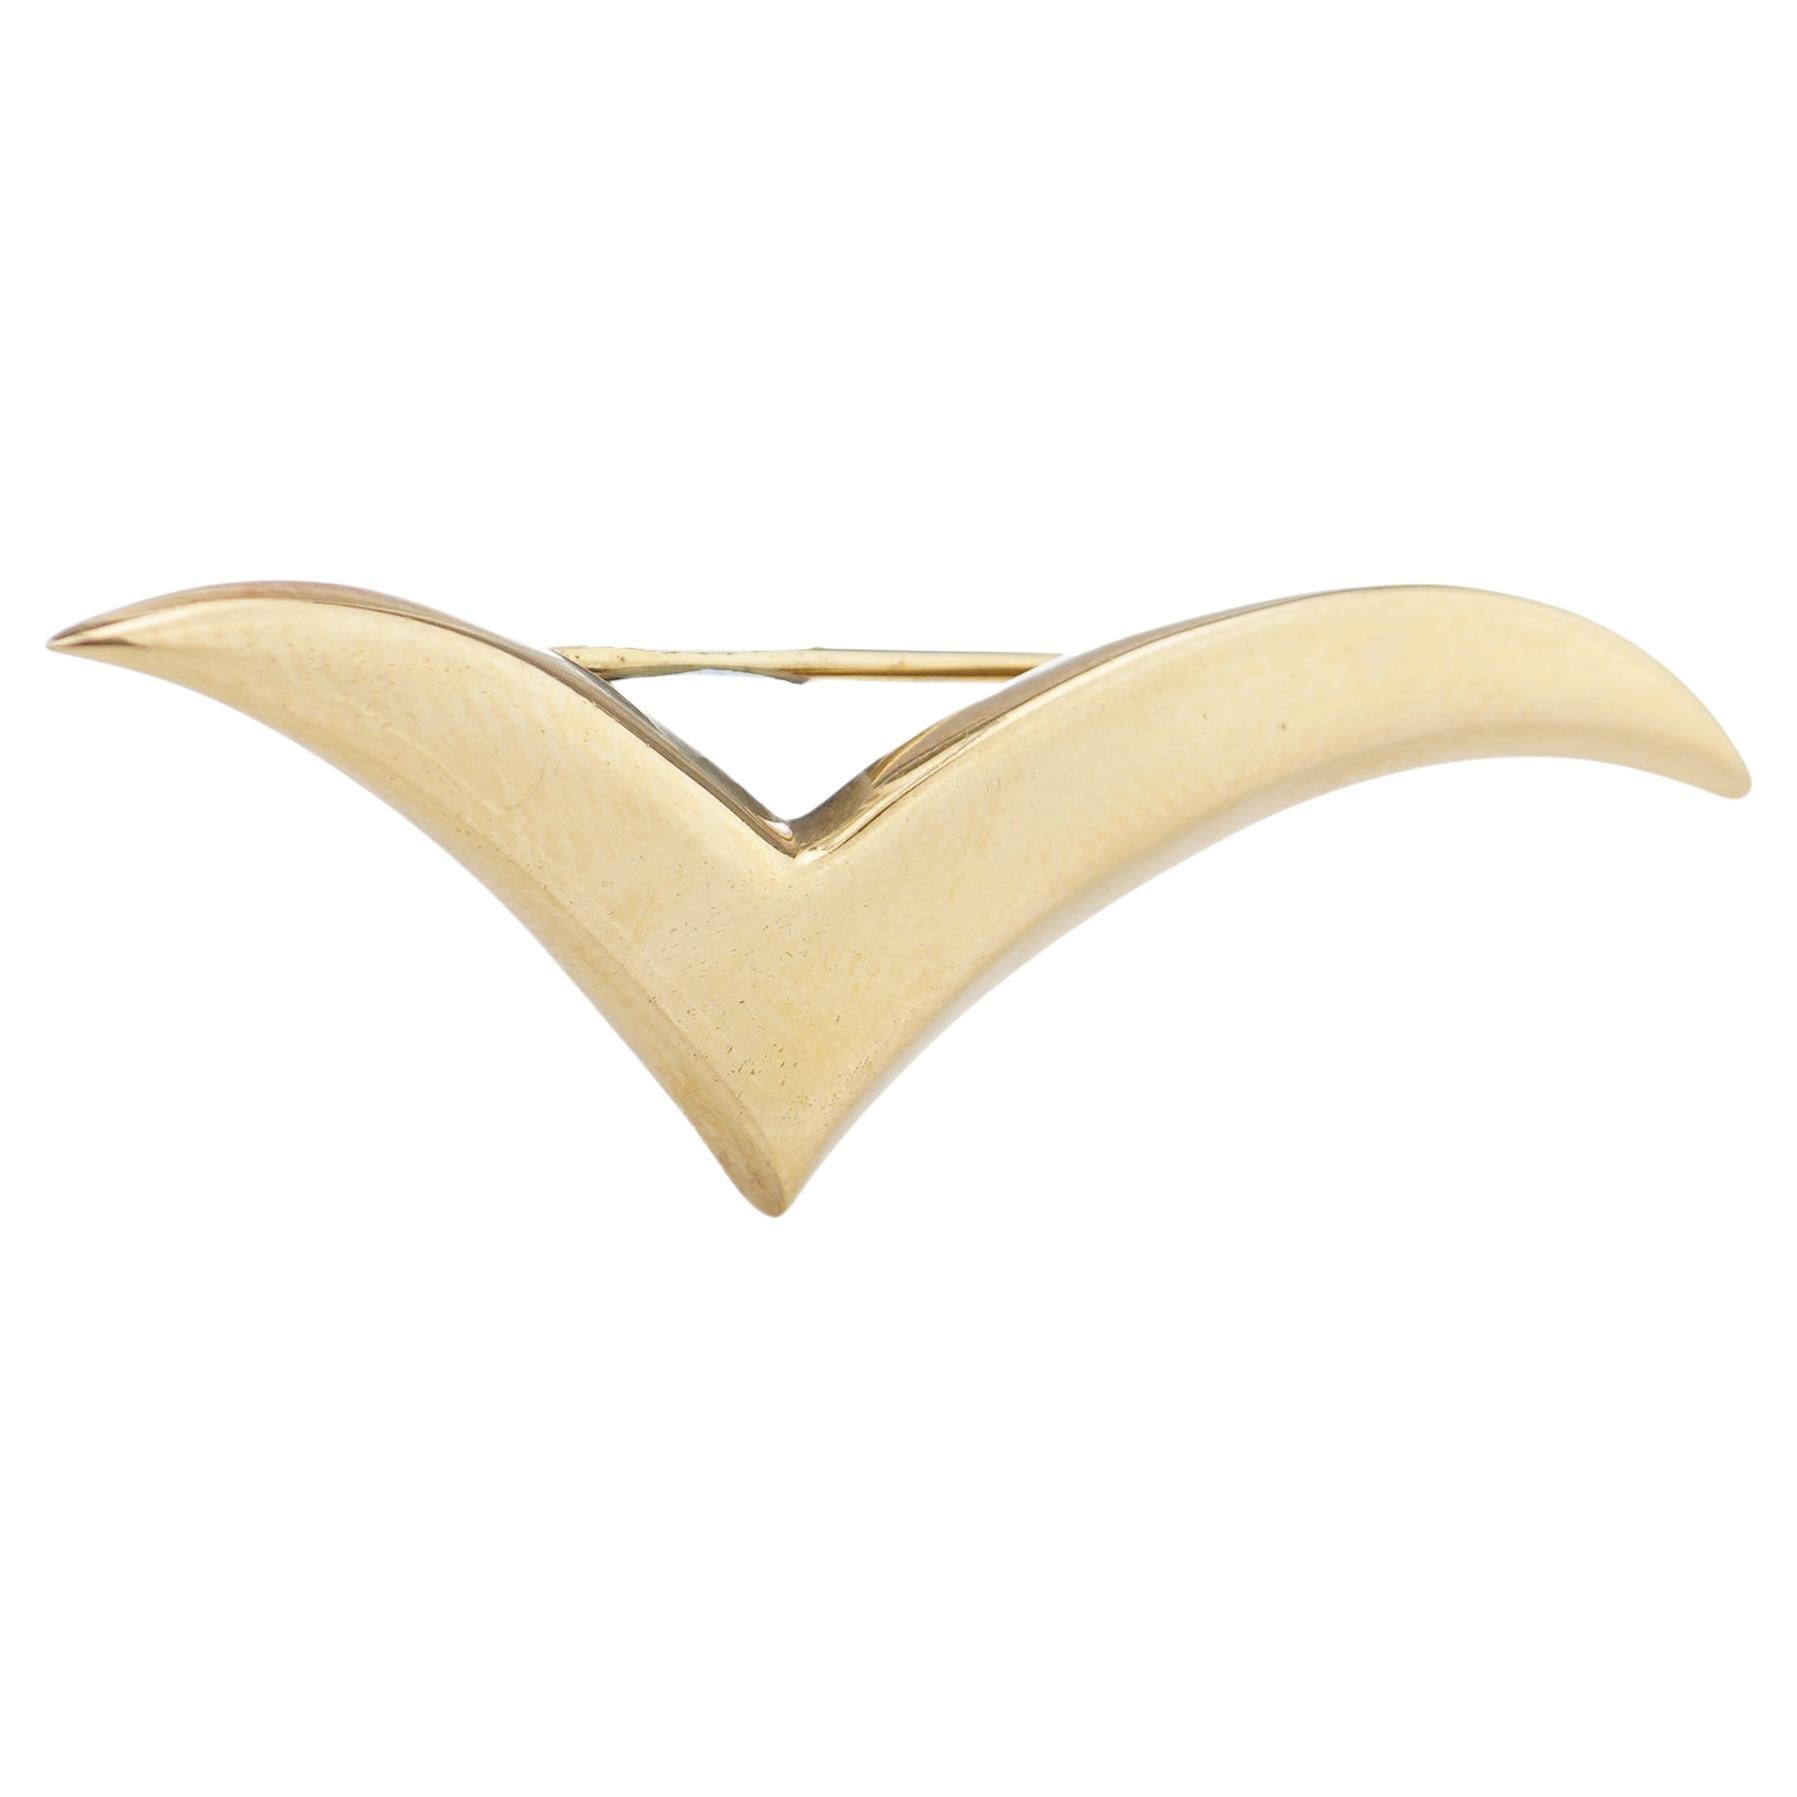 Tiffany & Co. 18kt. yellow gold seagull brooch